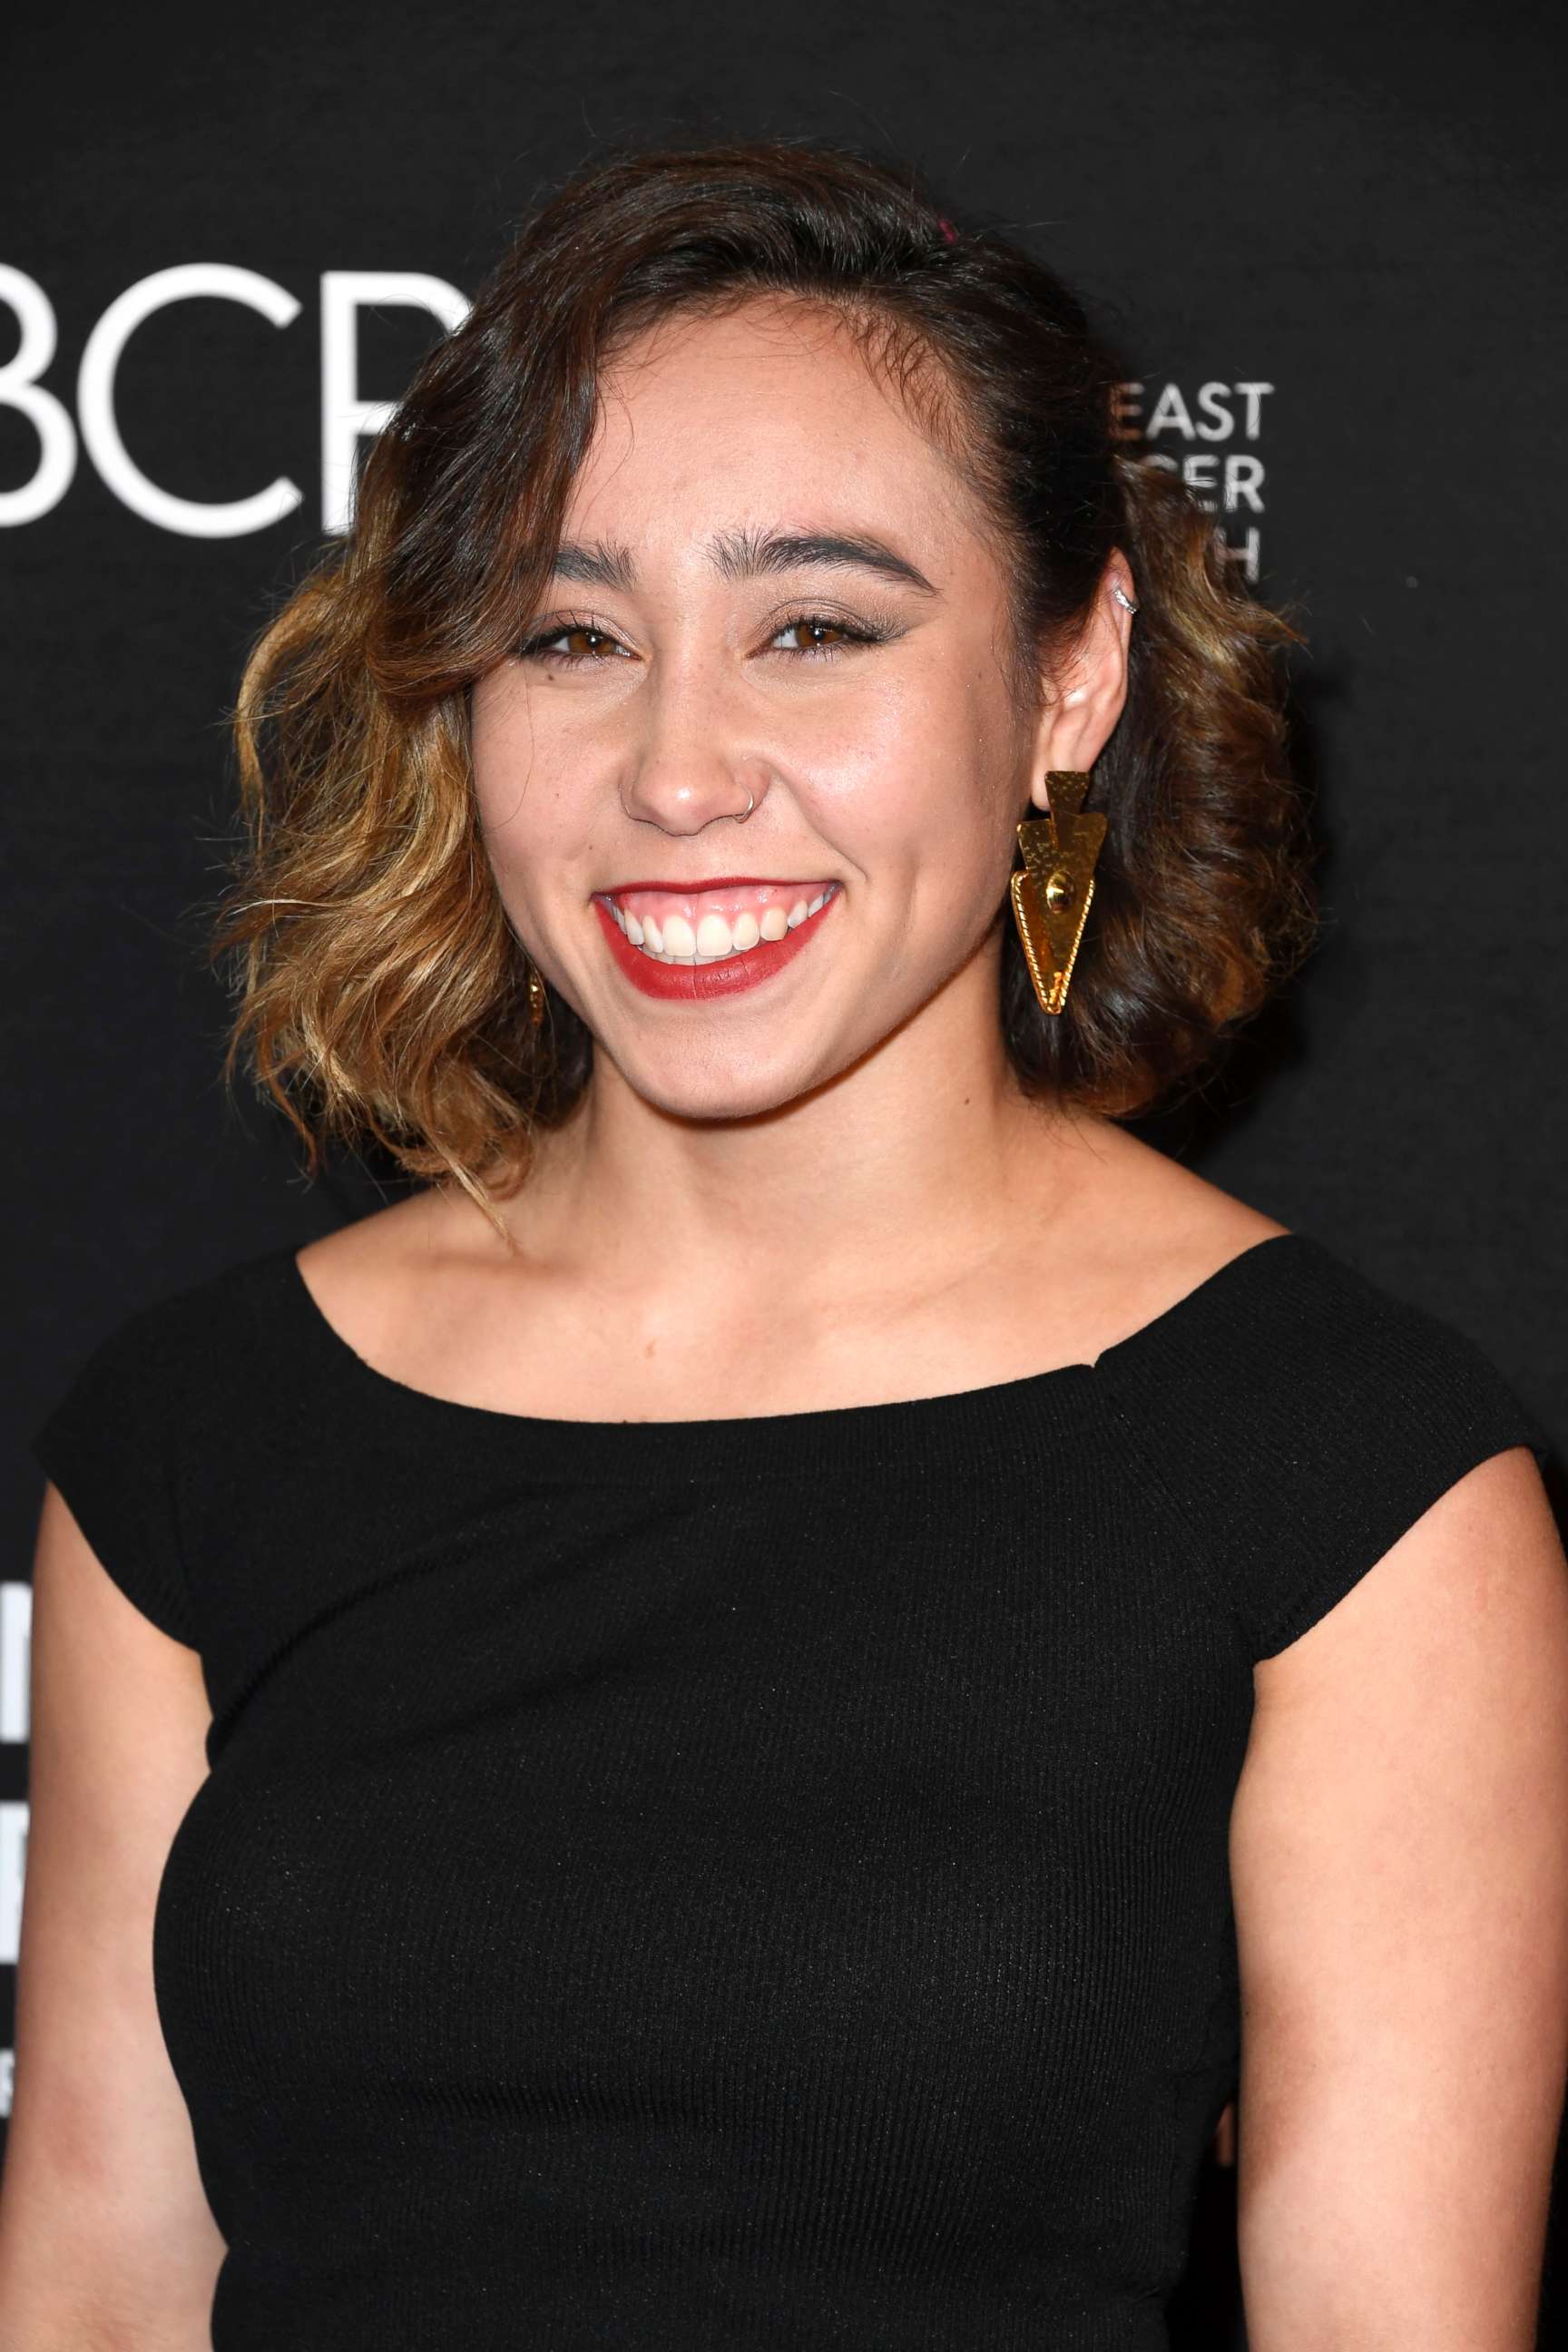 PHOTO: Katelyn Ohashi attends The Women's Cancer Research Fund's An Unforgettable Evening Benefit Gala at the Beverly Wilshire Four Seasons Hotel, Feb. 28, 2019, in Beverly Hills, Calif.